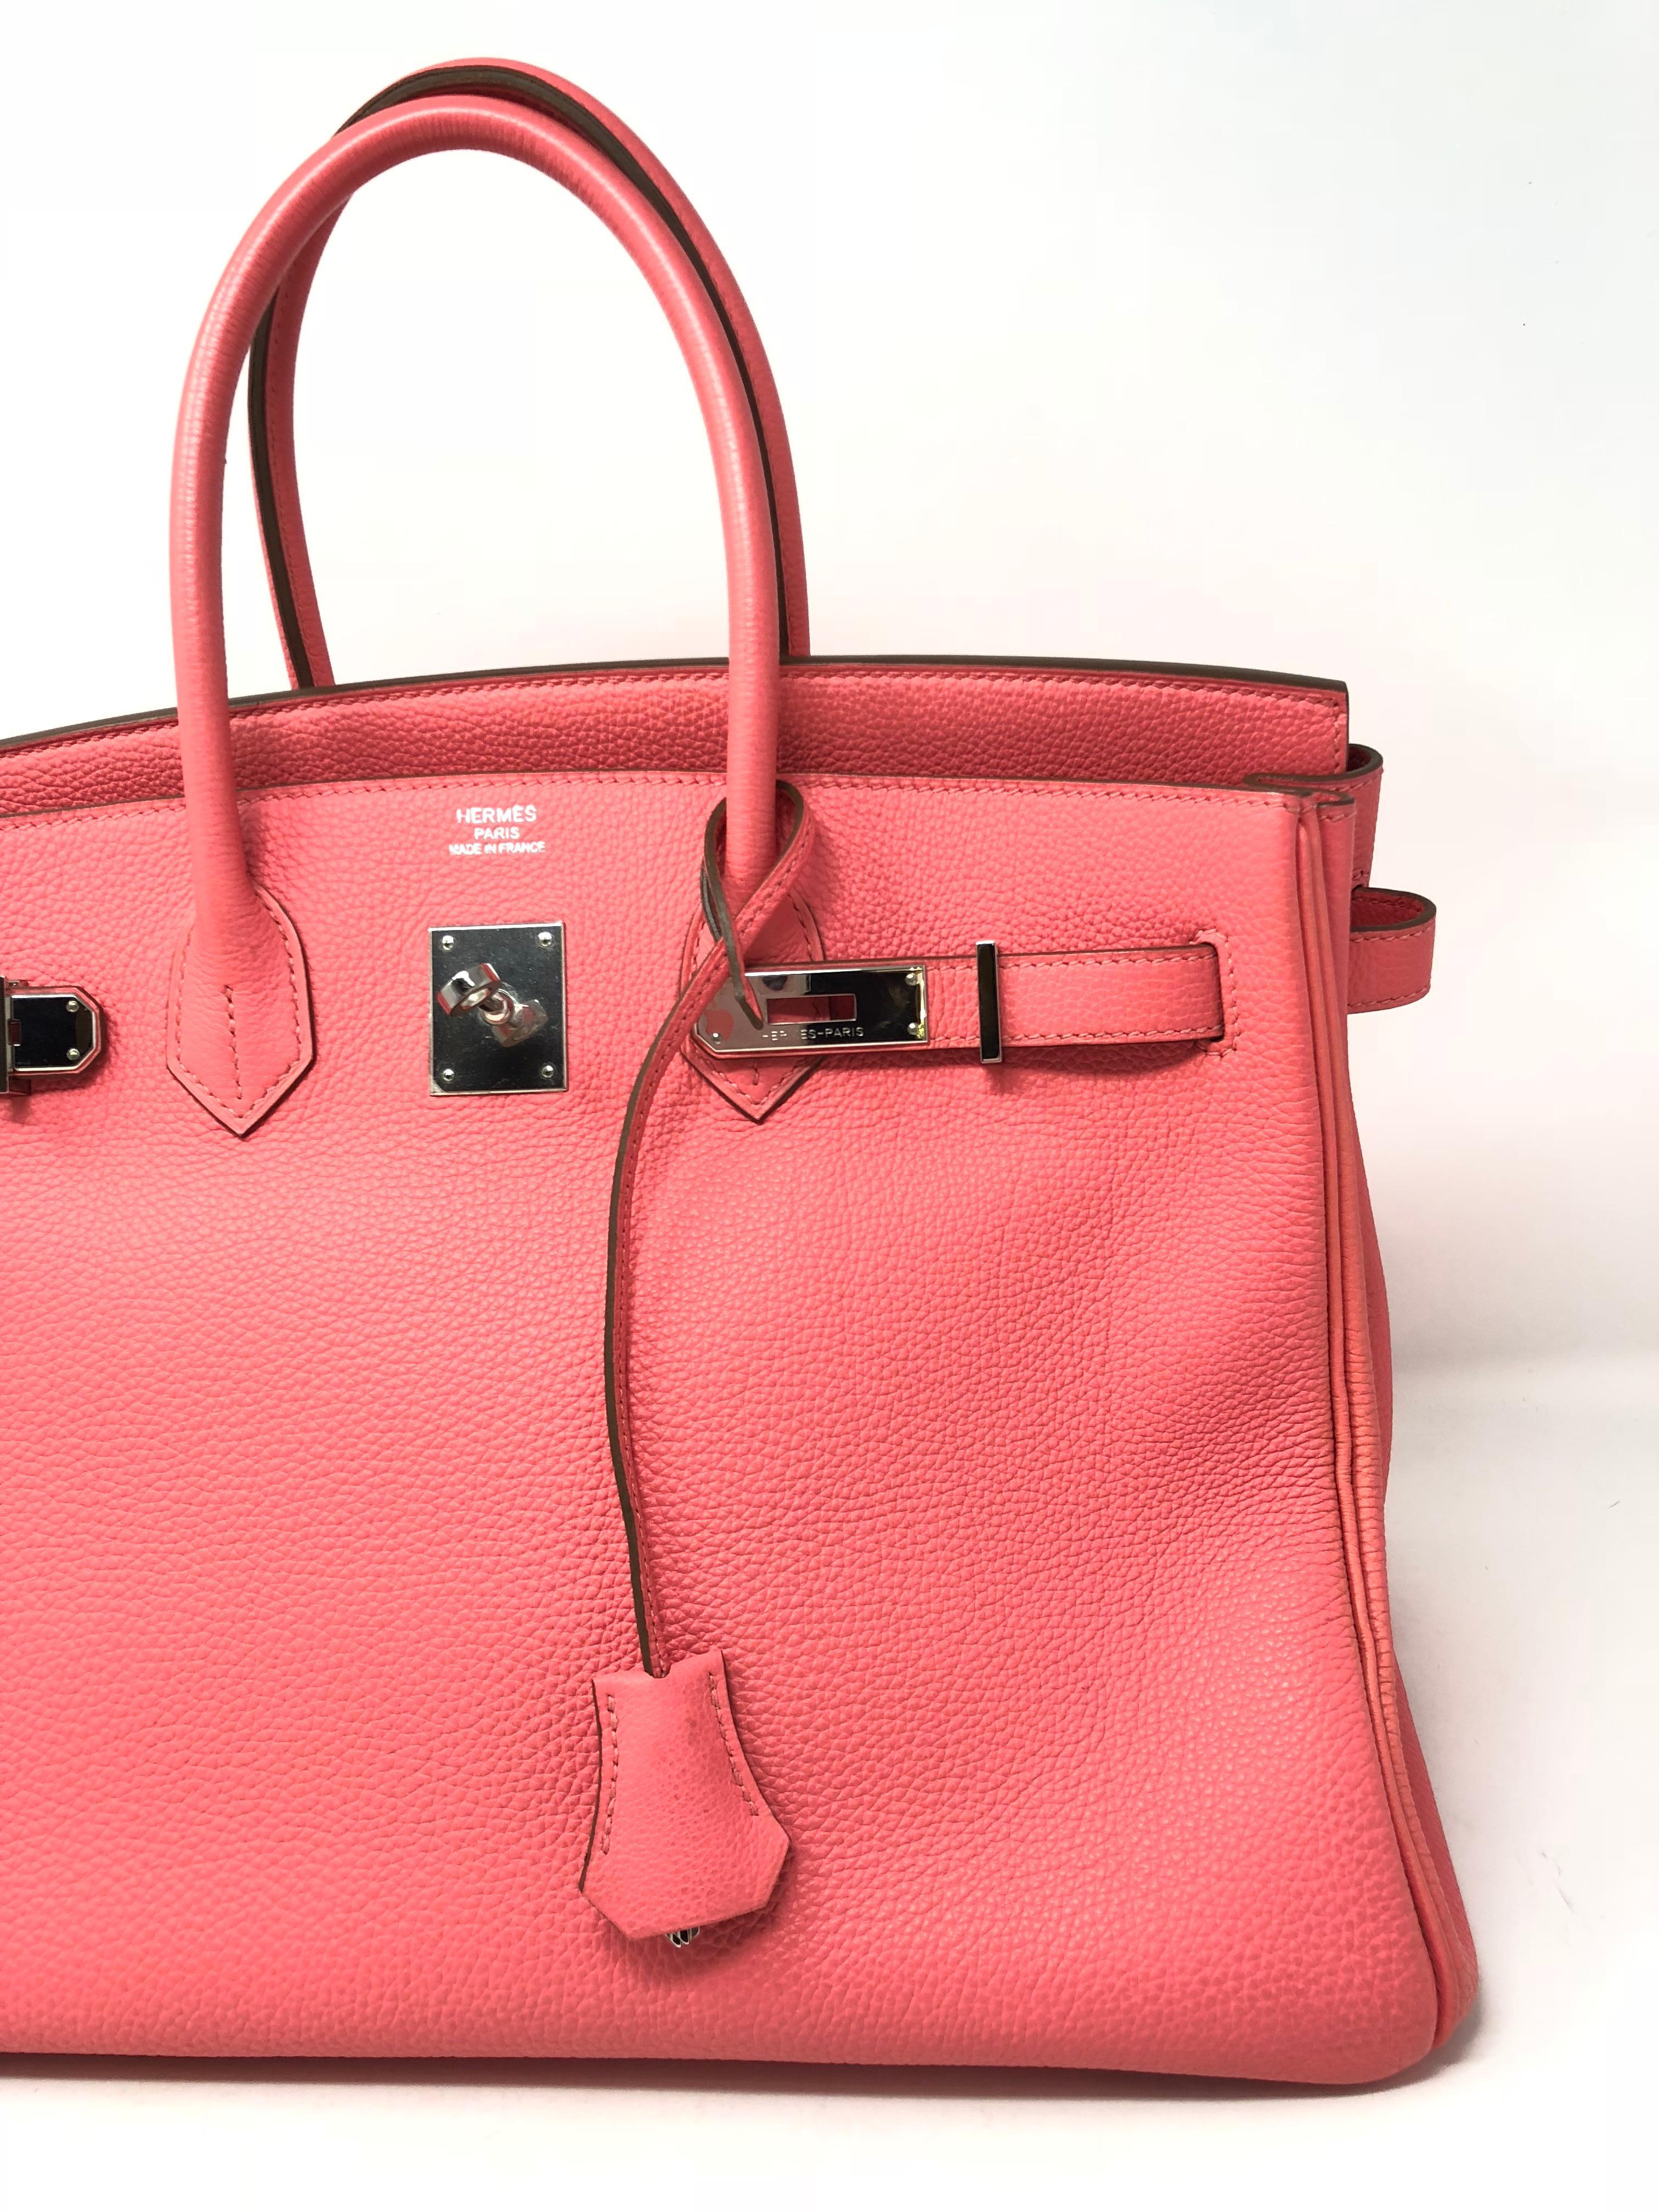 Hermes Birkin 35 Bubblegum Pink Color. Clemence leather. Beautiful pink color and in good condition. Palladium hardware. P stamp. From 2012. Guaranteed authentic. 